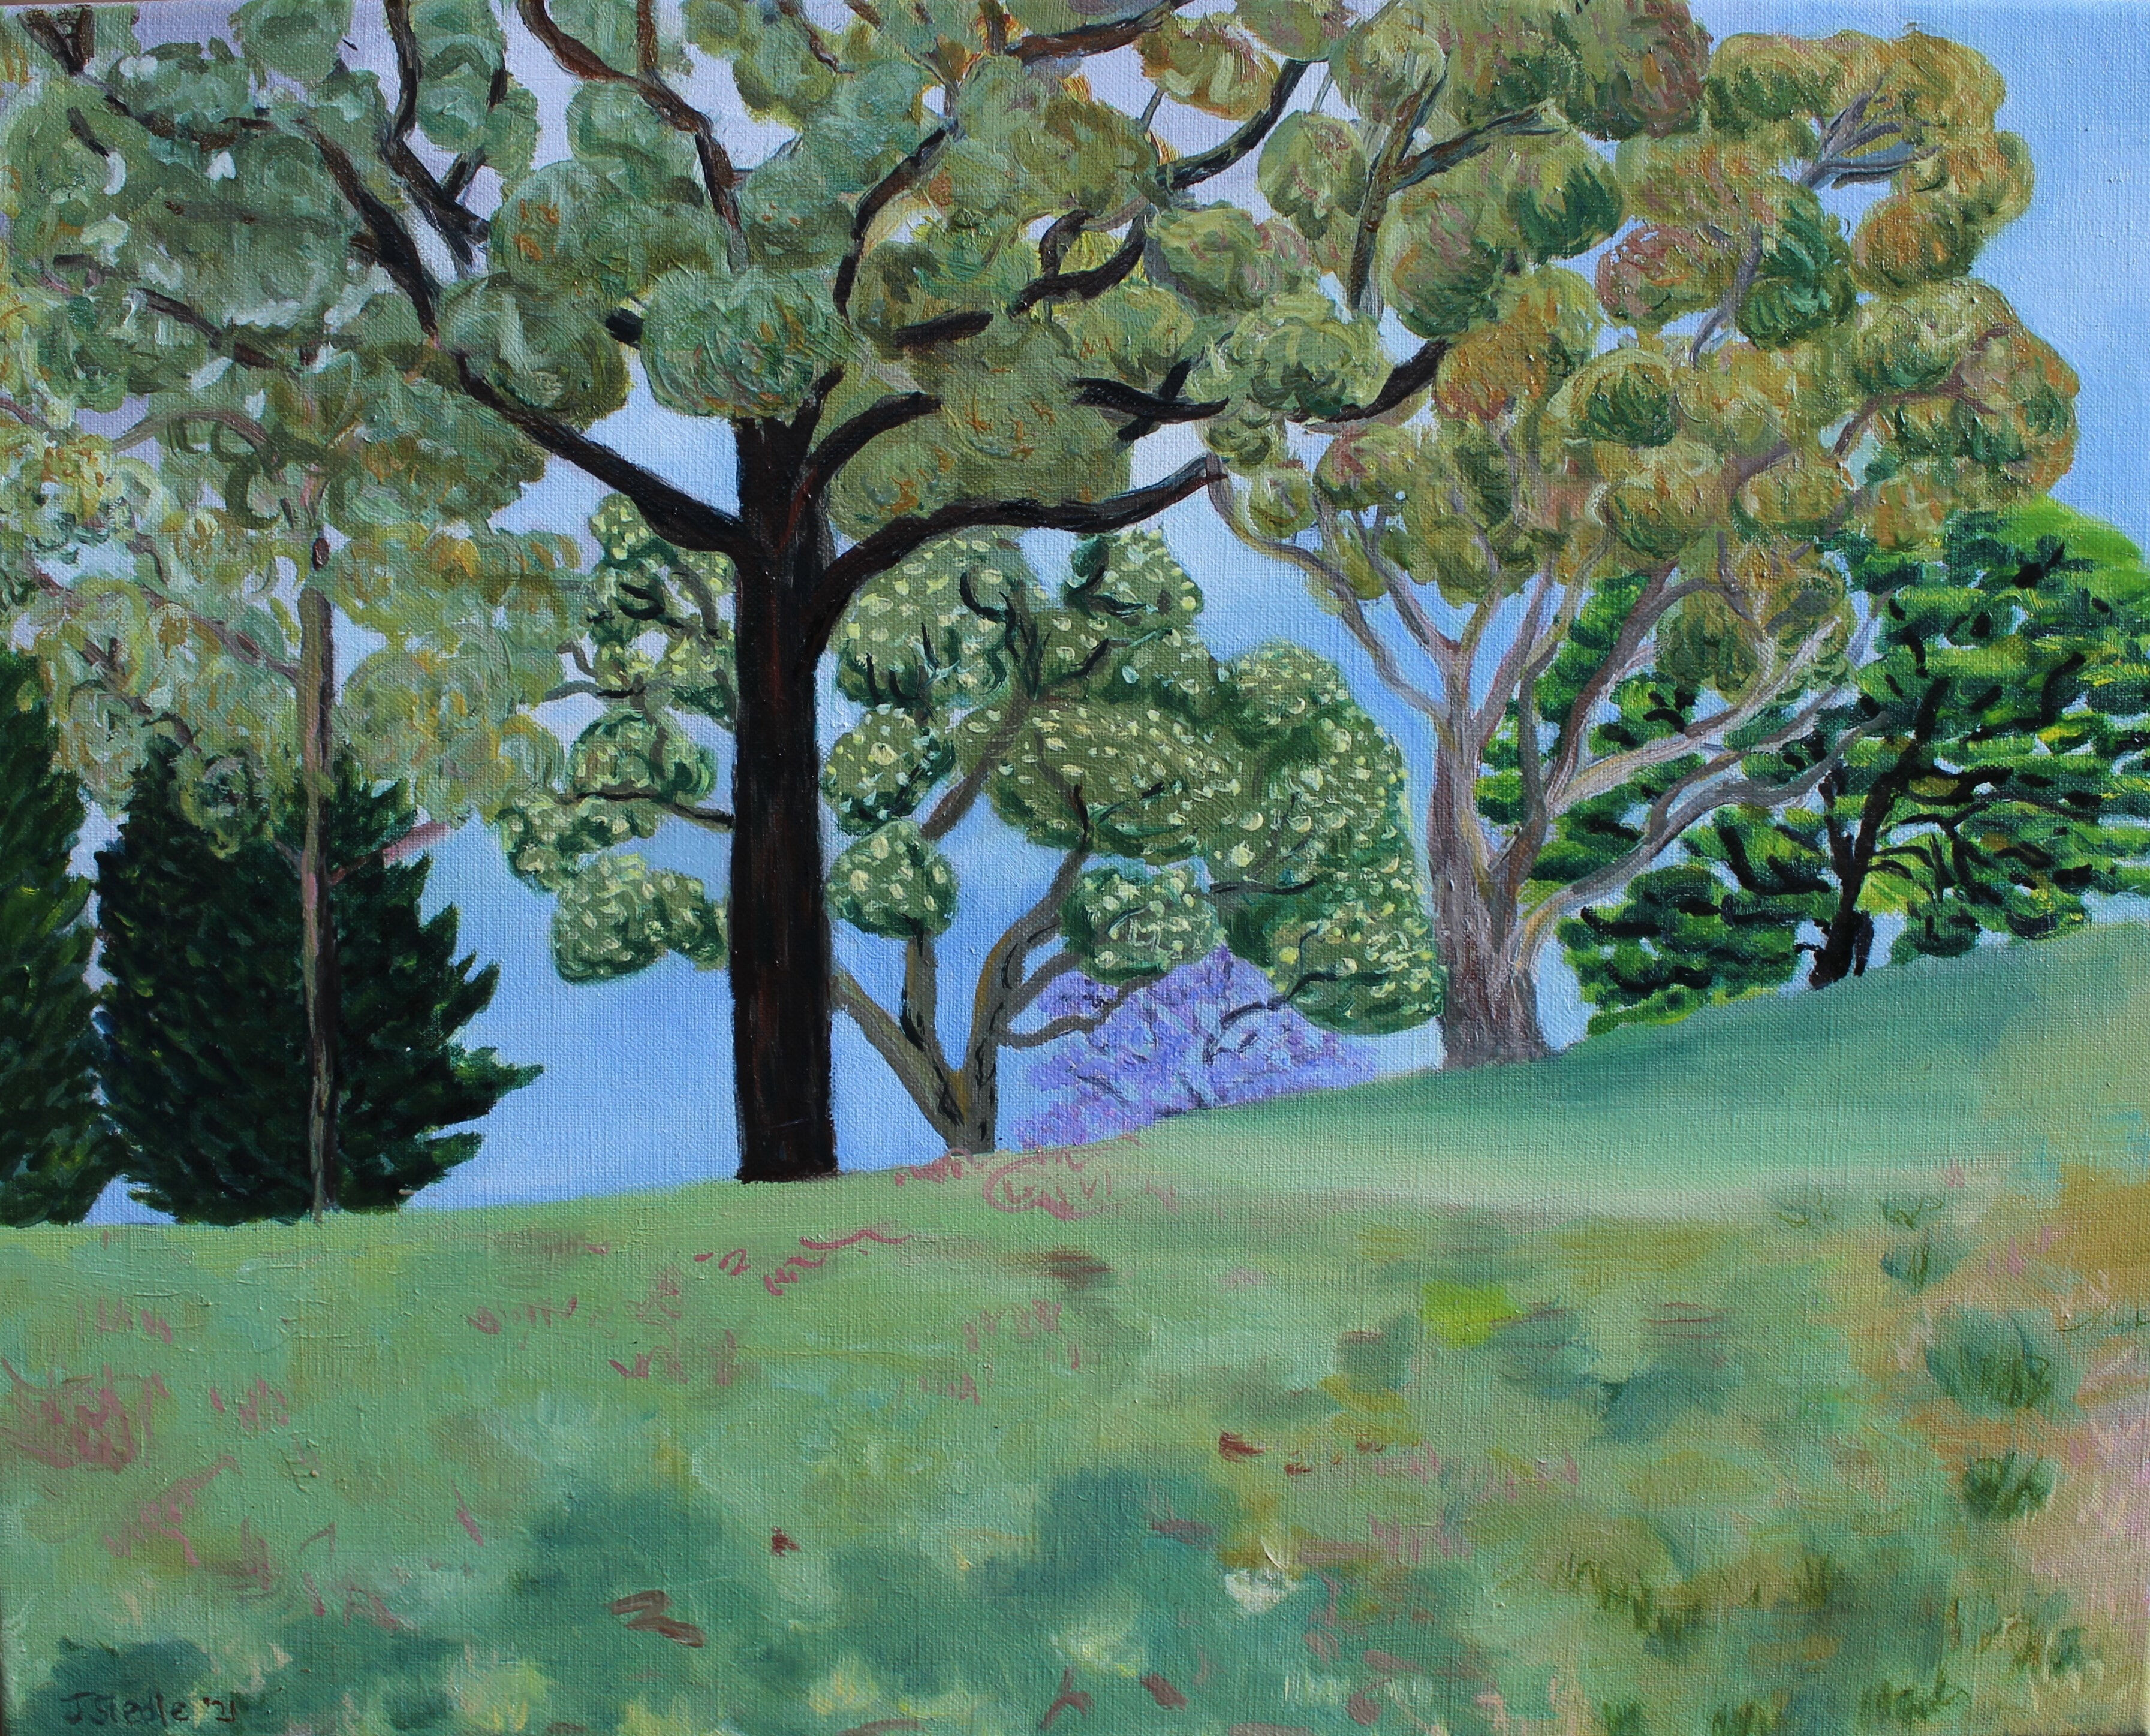 Justine Siedle The trees on the hill in Kew 3 51 x 40.5 cm Oil on Linen